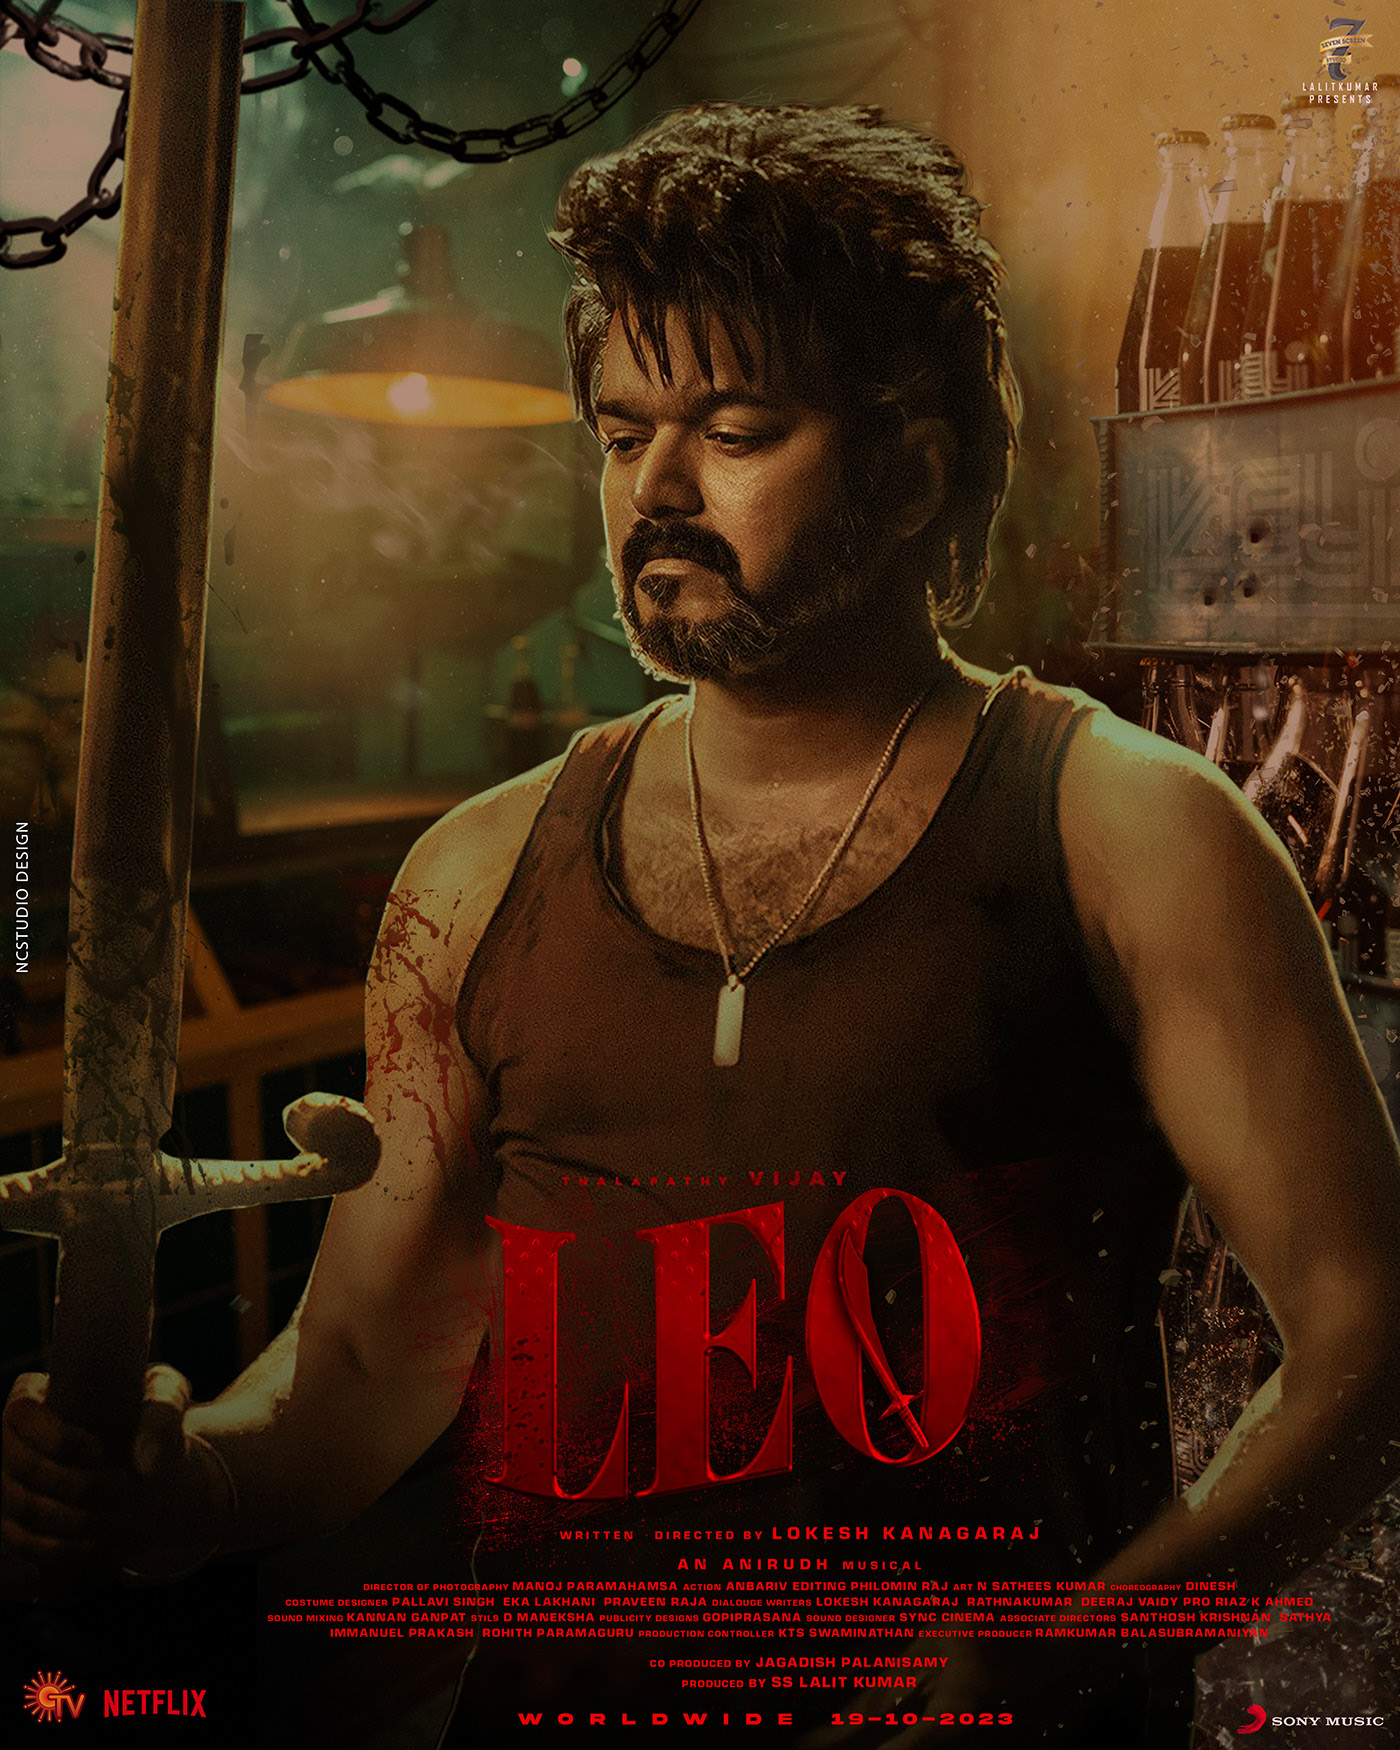 leo bloody sweet poster images